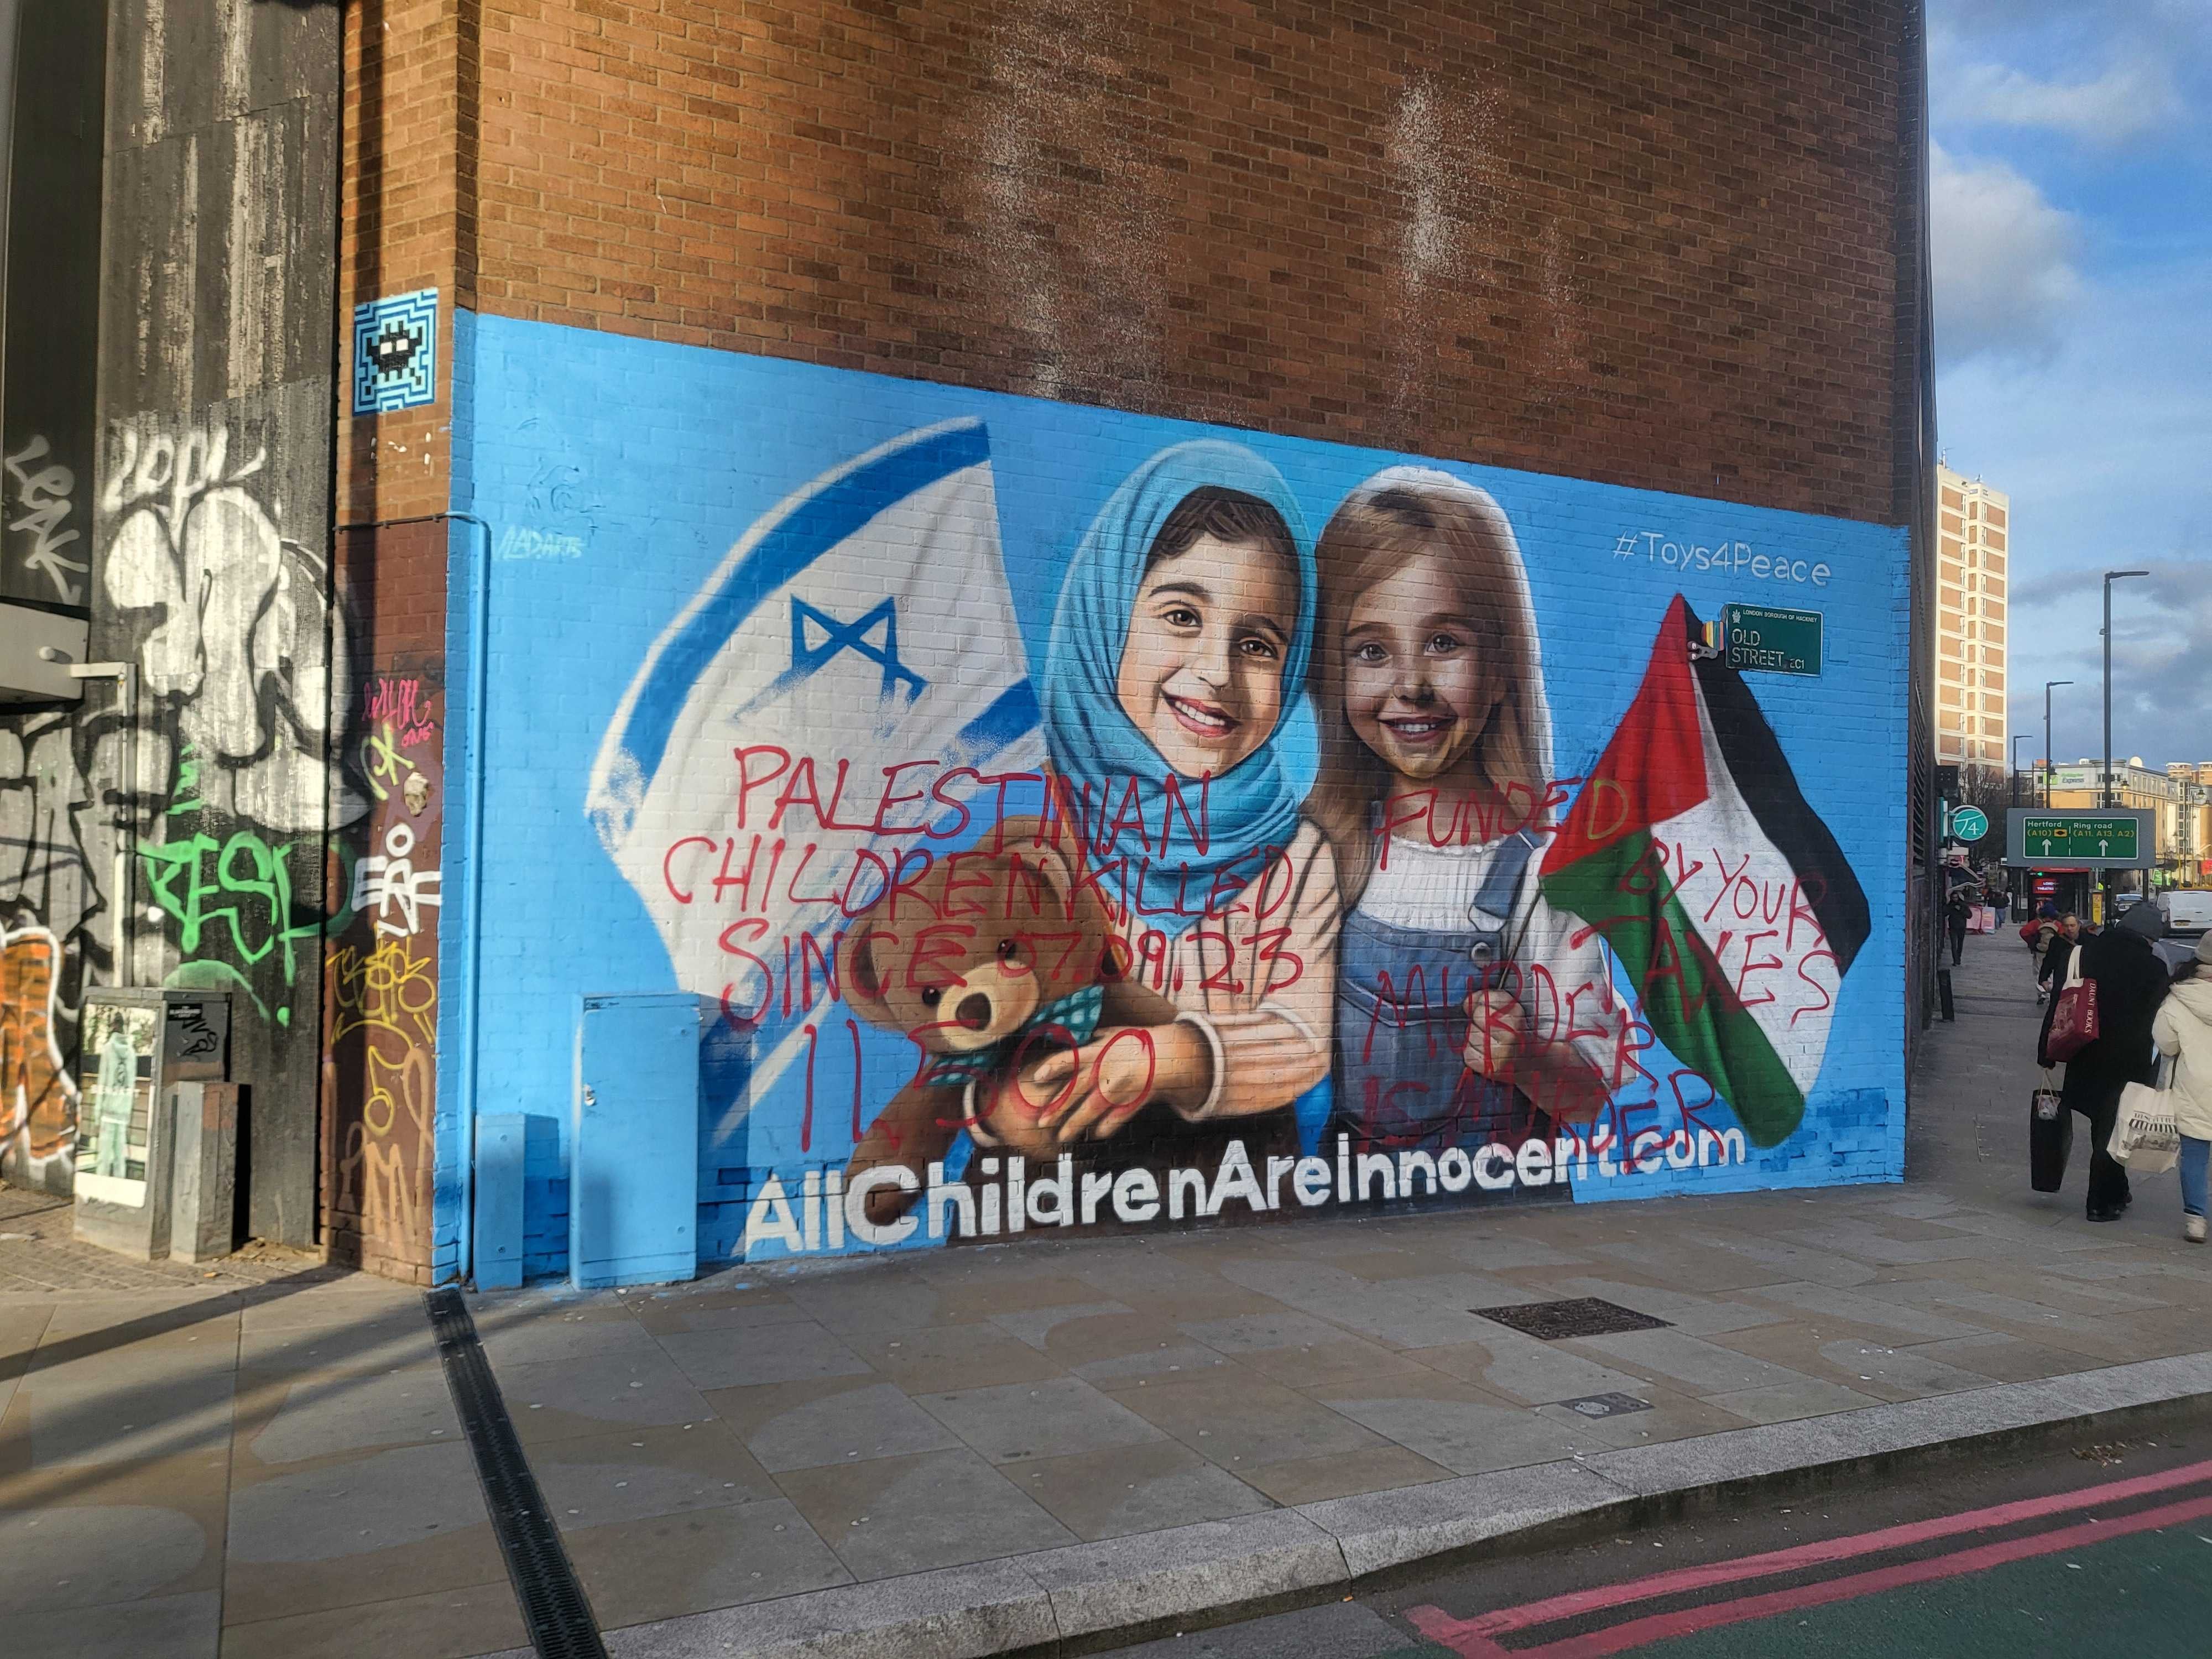 The Israel-Gaza peace mural was defaced with graffiti just 16 days after it was unveiled